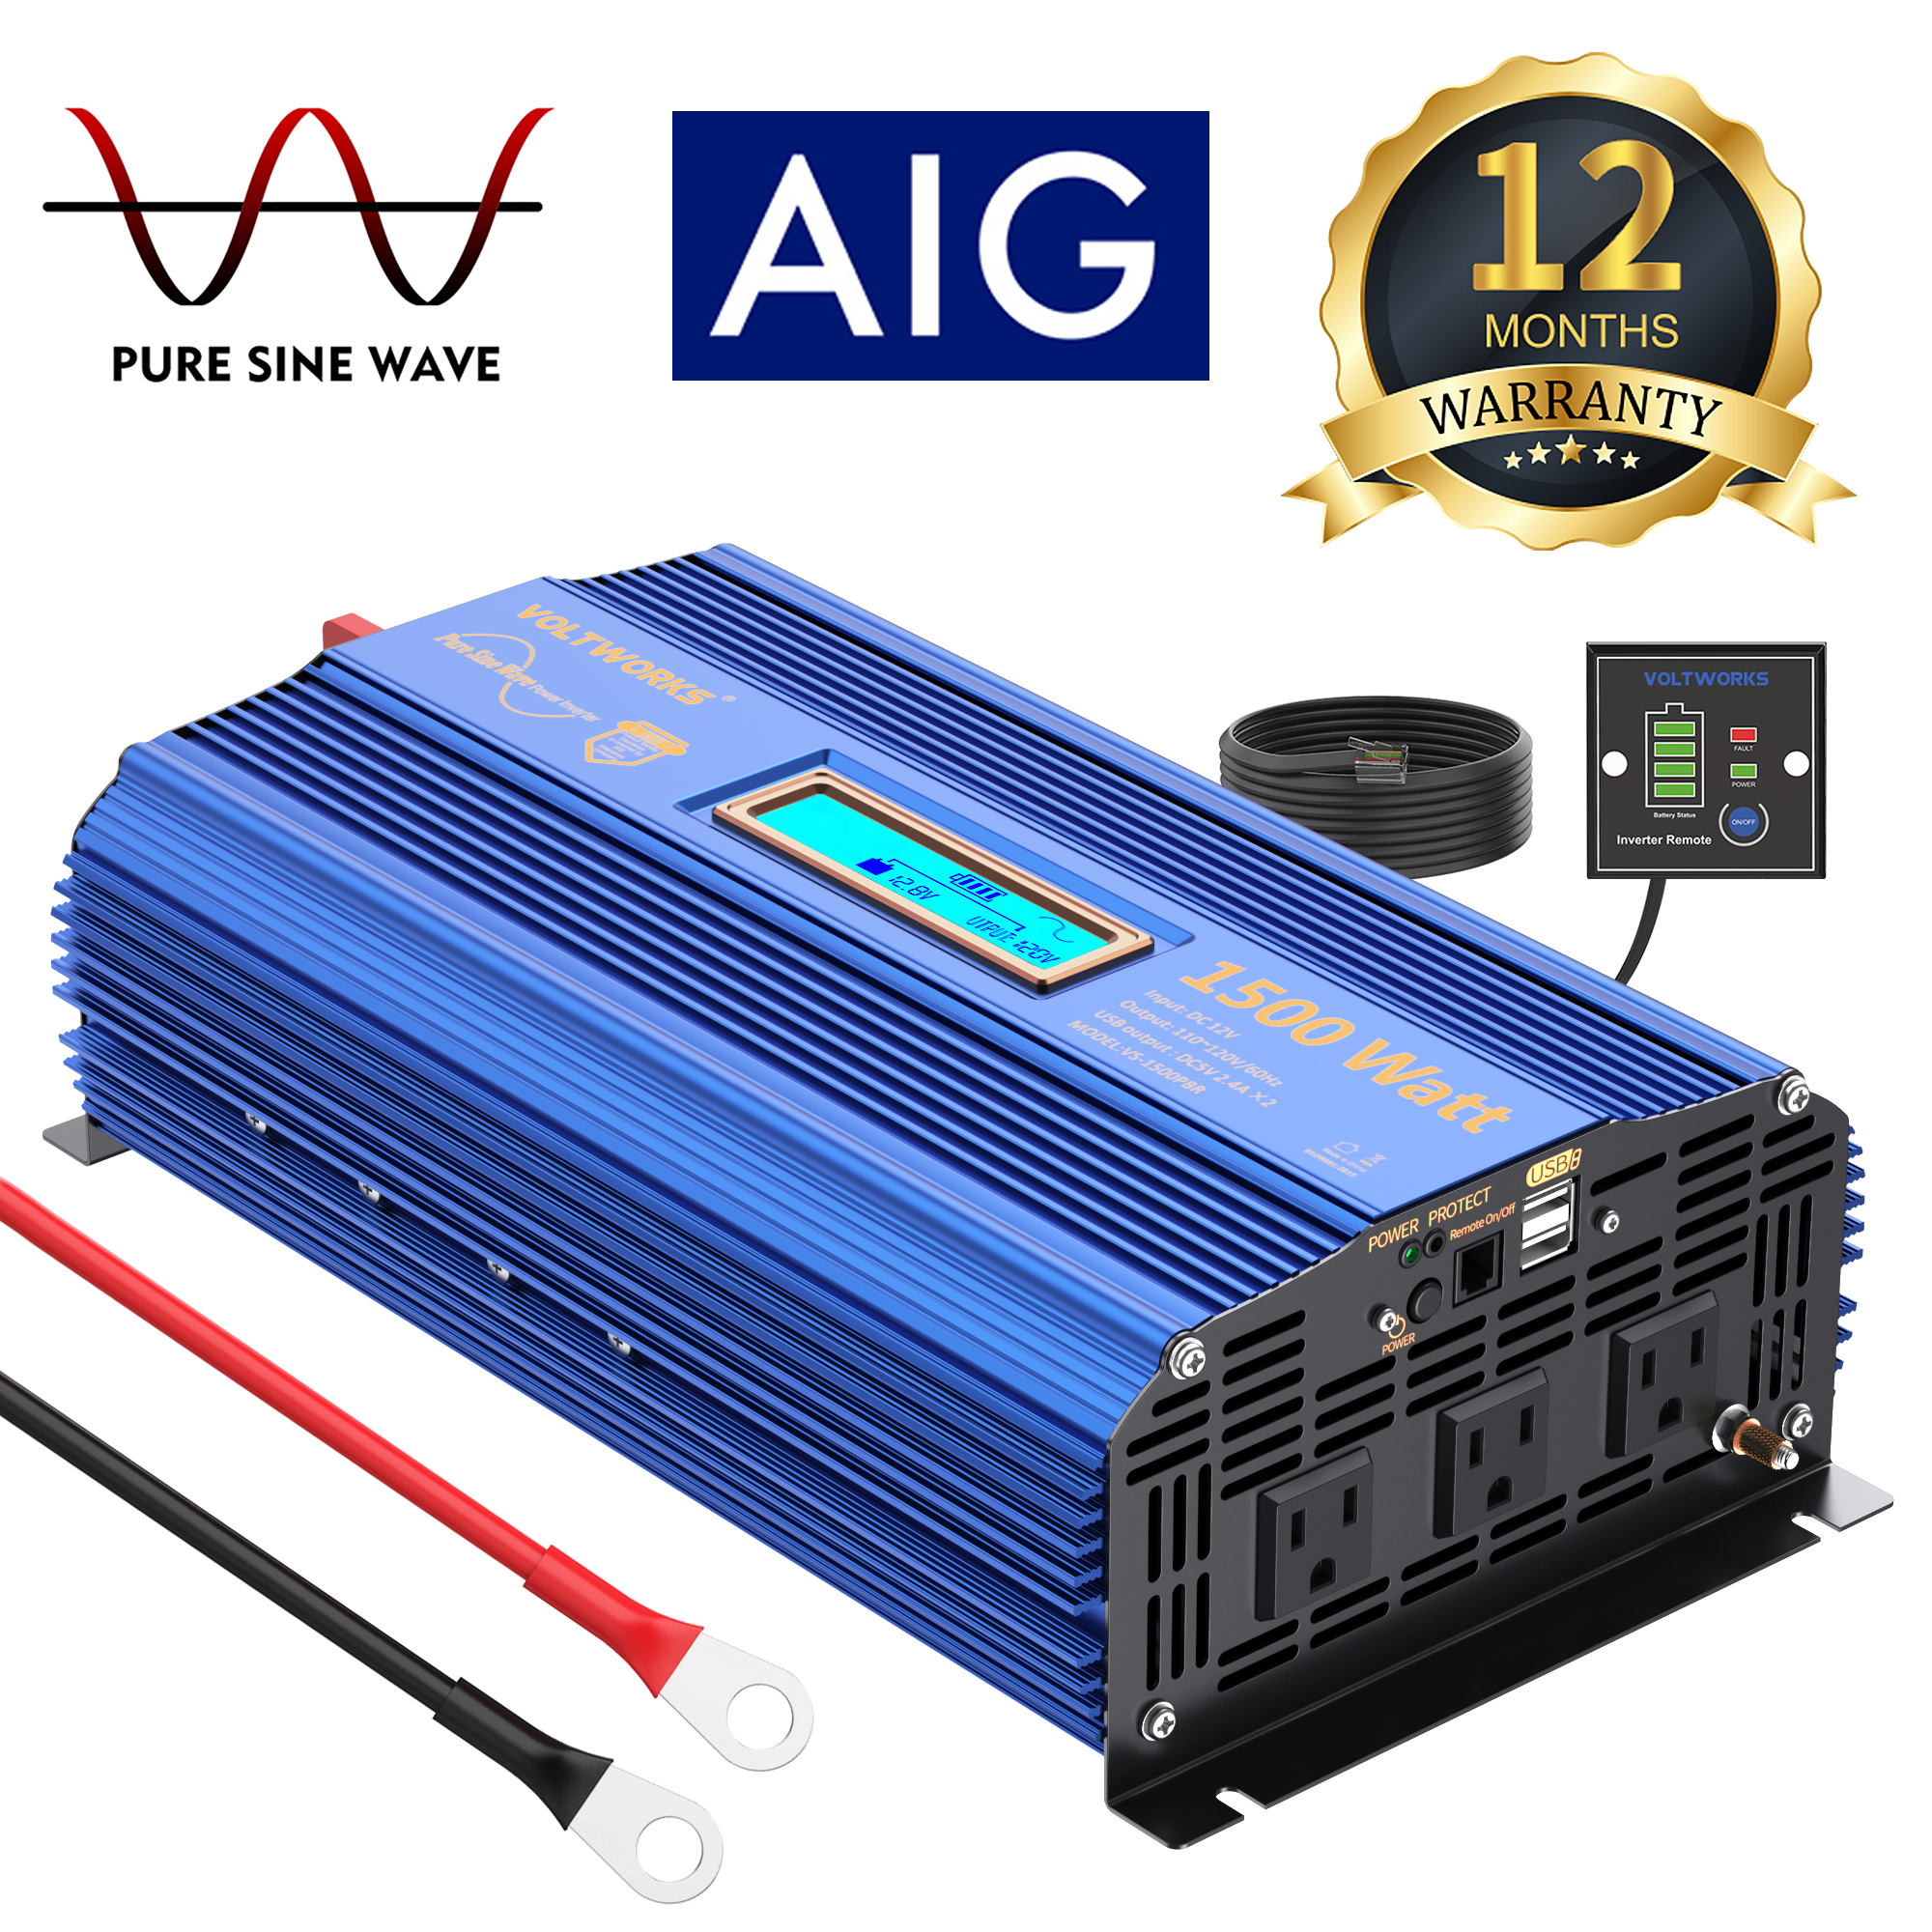 FLAMEZUM Power Inverter Pure Sine Wave 3500Watt 24V DC to 110V 120V Peak Power 4000Watt with Remote Control Dual AC Outlets and Dual USB Port for CPAP RV Car Solar System Emergency 